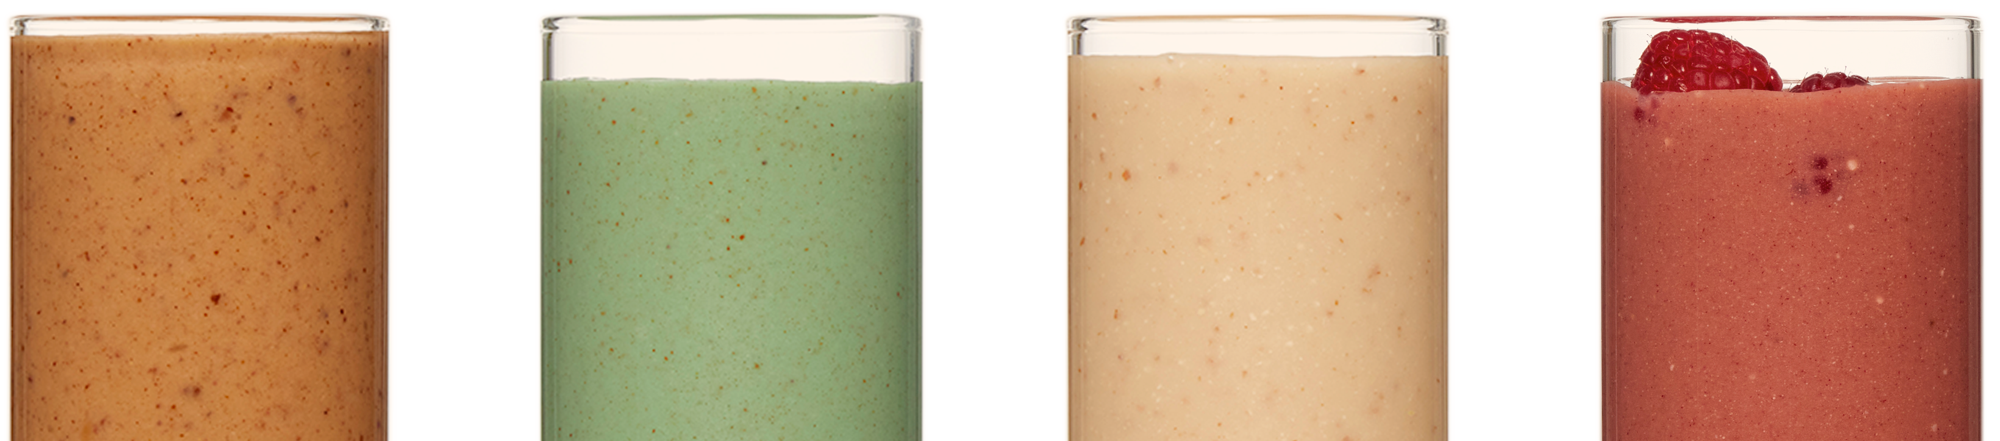 Four clear classes filled with smoothies. The smoothies are redish brown, green, beige, and red from left to right. The rightmost smoothie is garnished with two raspberries.